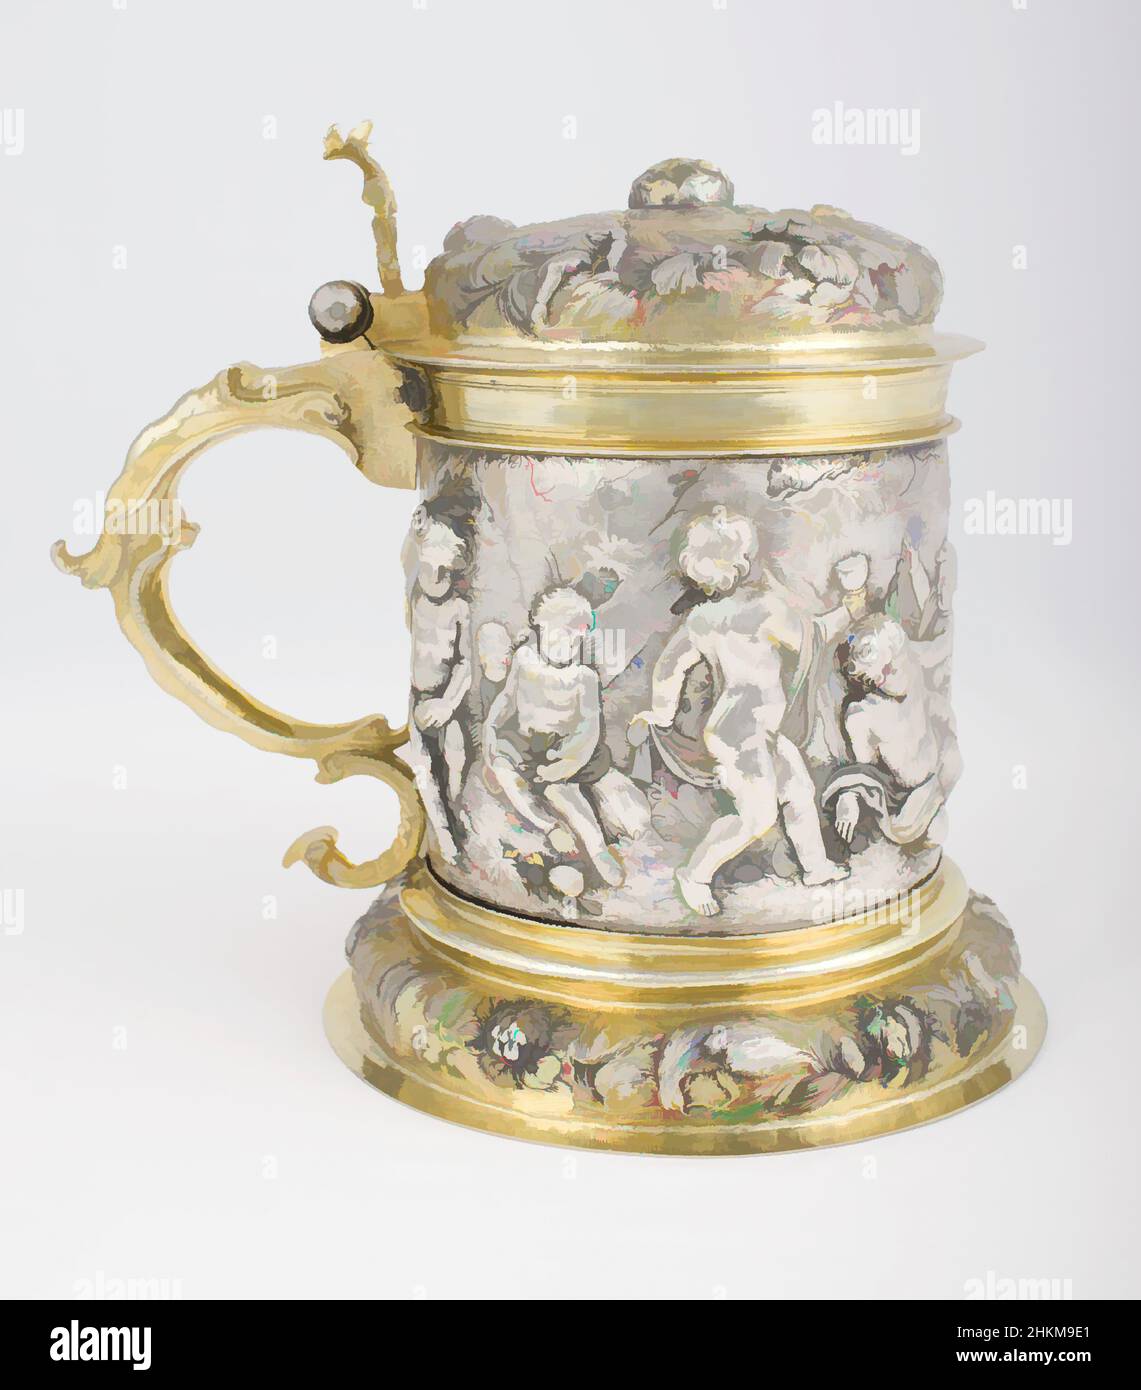 Art inspired by Tankard, Peter Öhr I, German, master 1649, died 1662, 1650-60, Silver with gilding, Made in Hamburg, Germany, Europe, Metalwork, 9 3/8 × 10 1/2 × 7 5/8 in. (23.8 × 26.7 × 19.4 cm, Classic works modernized by Artotop with a splash of modernity. Shapes, color and value, eye-catching visual impact on art. Emotions through freedom of artworks in a contemporary way. A timeless message pursuing a wildly creative new direction. Artists turning to the digital medium and creating the Artotop NFT Stock Photo